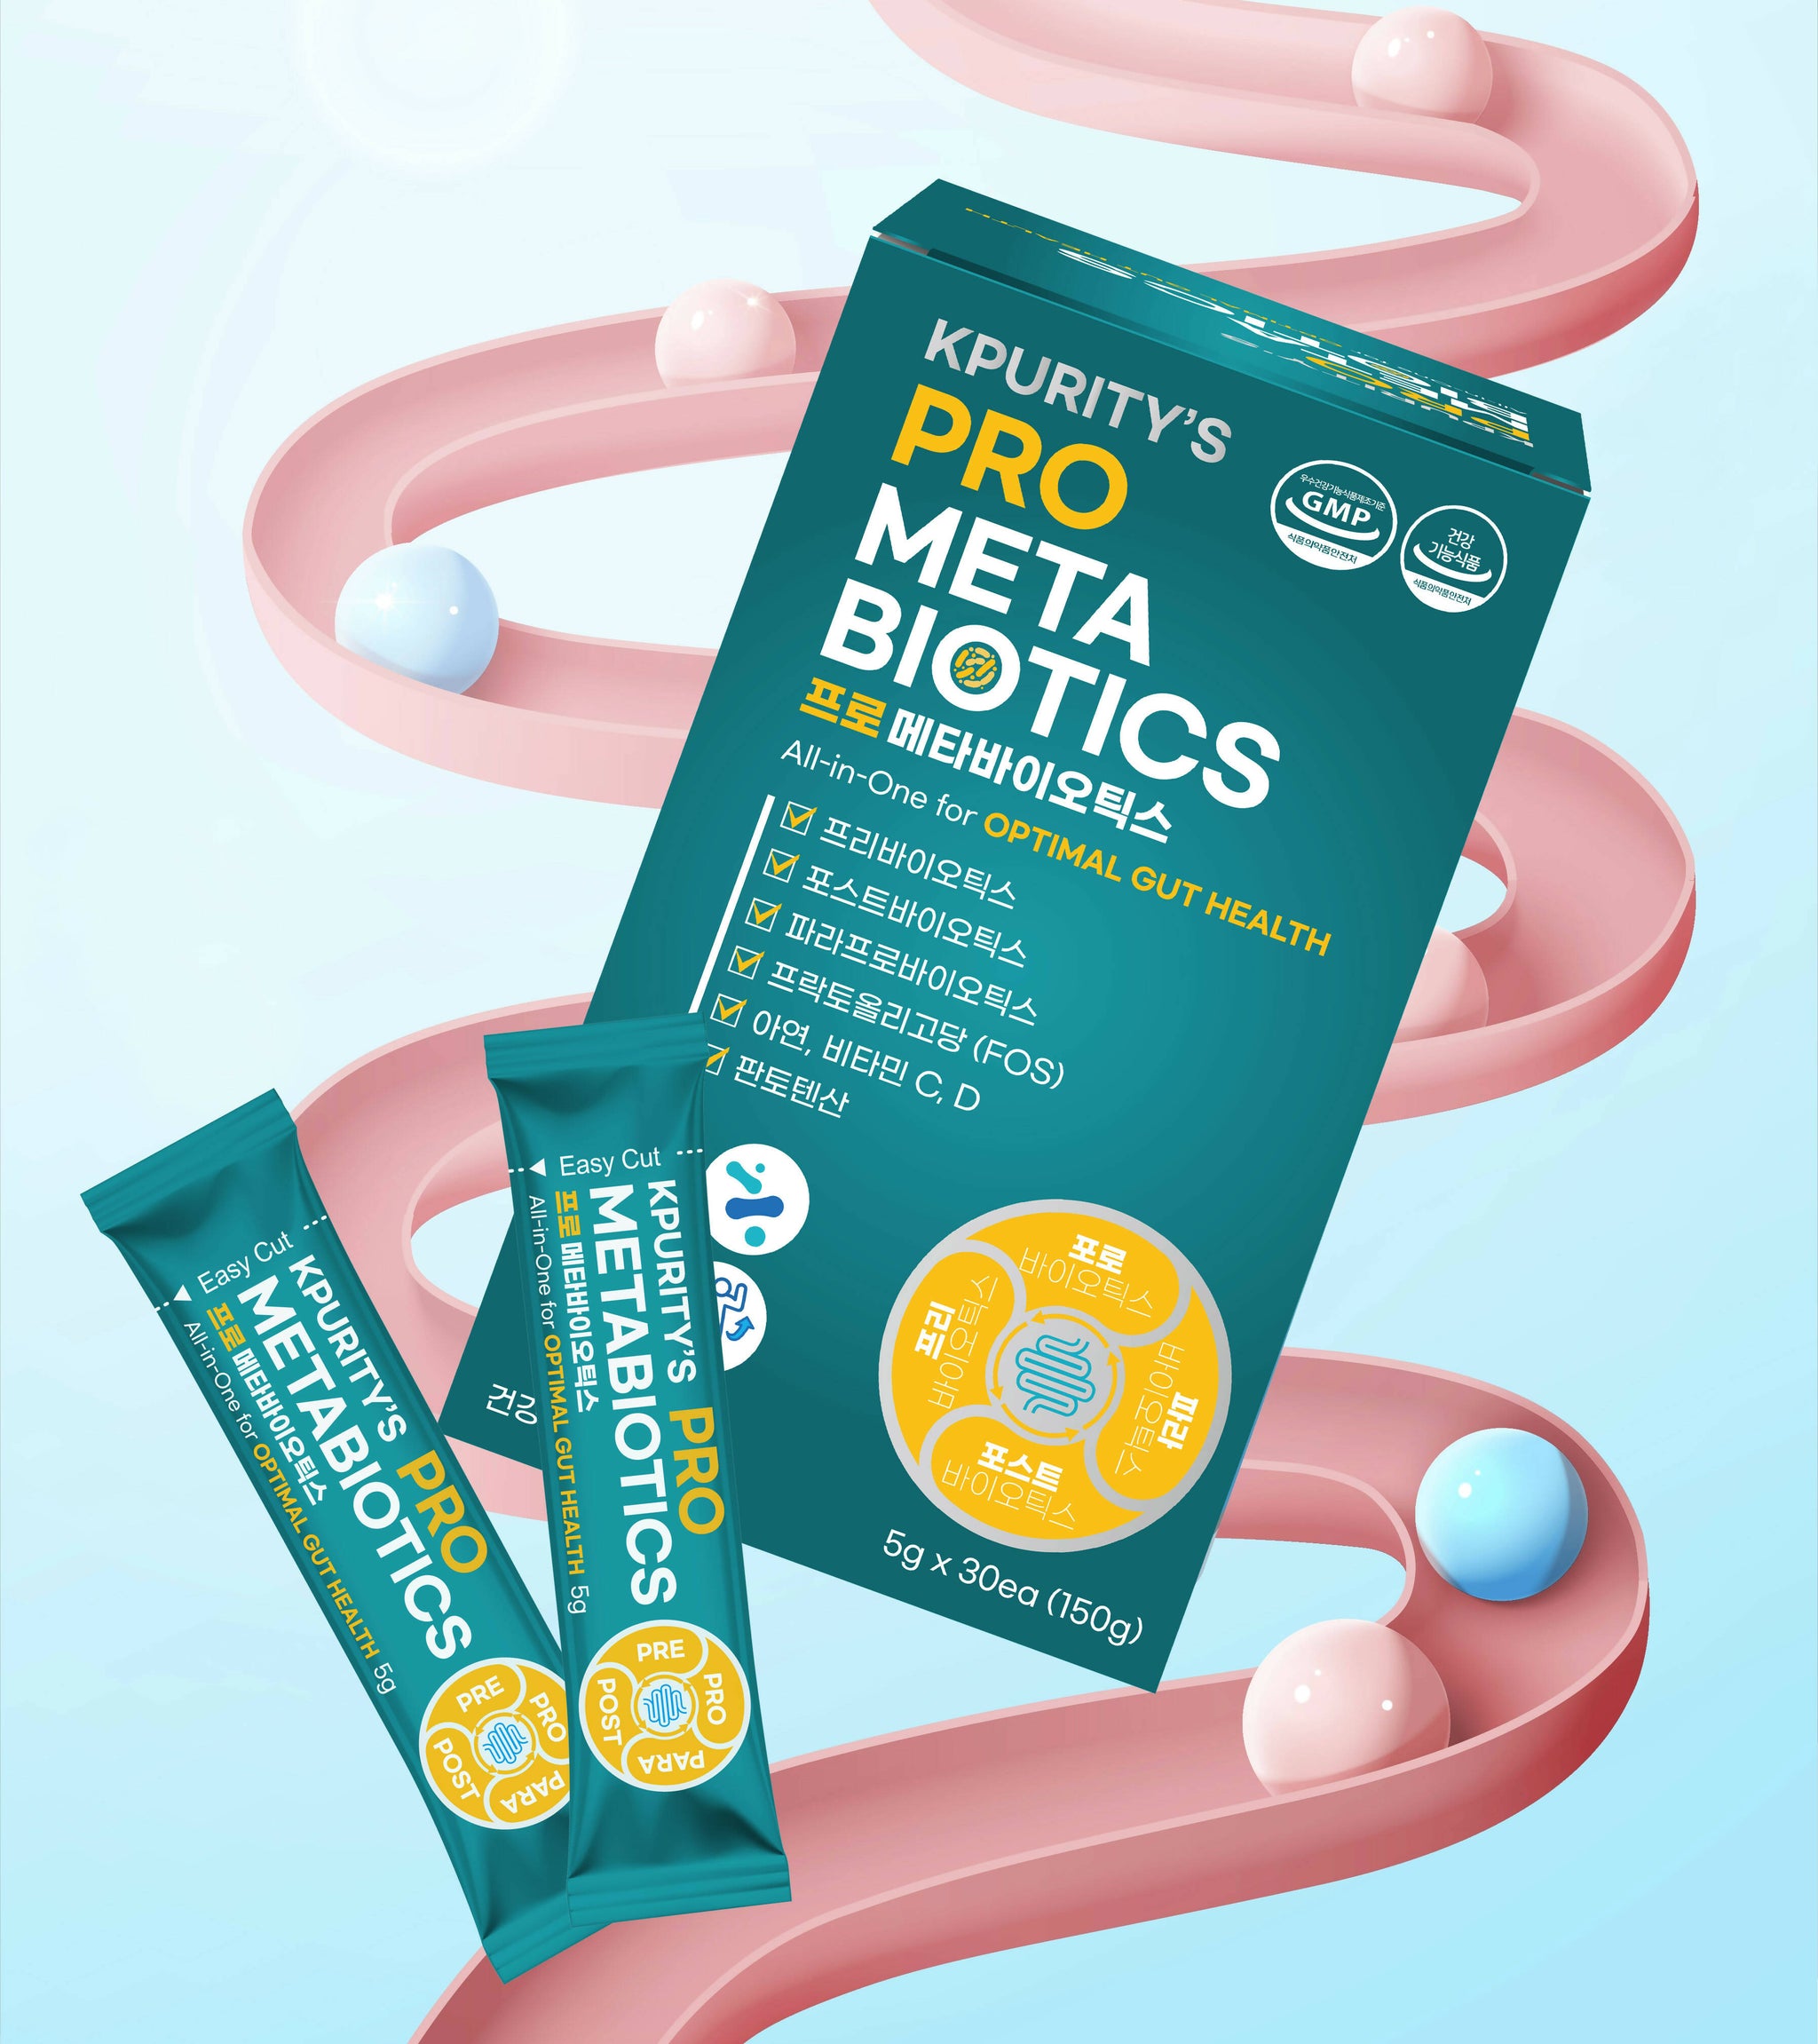 Pro Metabiotics All-In-One For Optimal Gut Health 5g x 30 Sticks